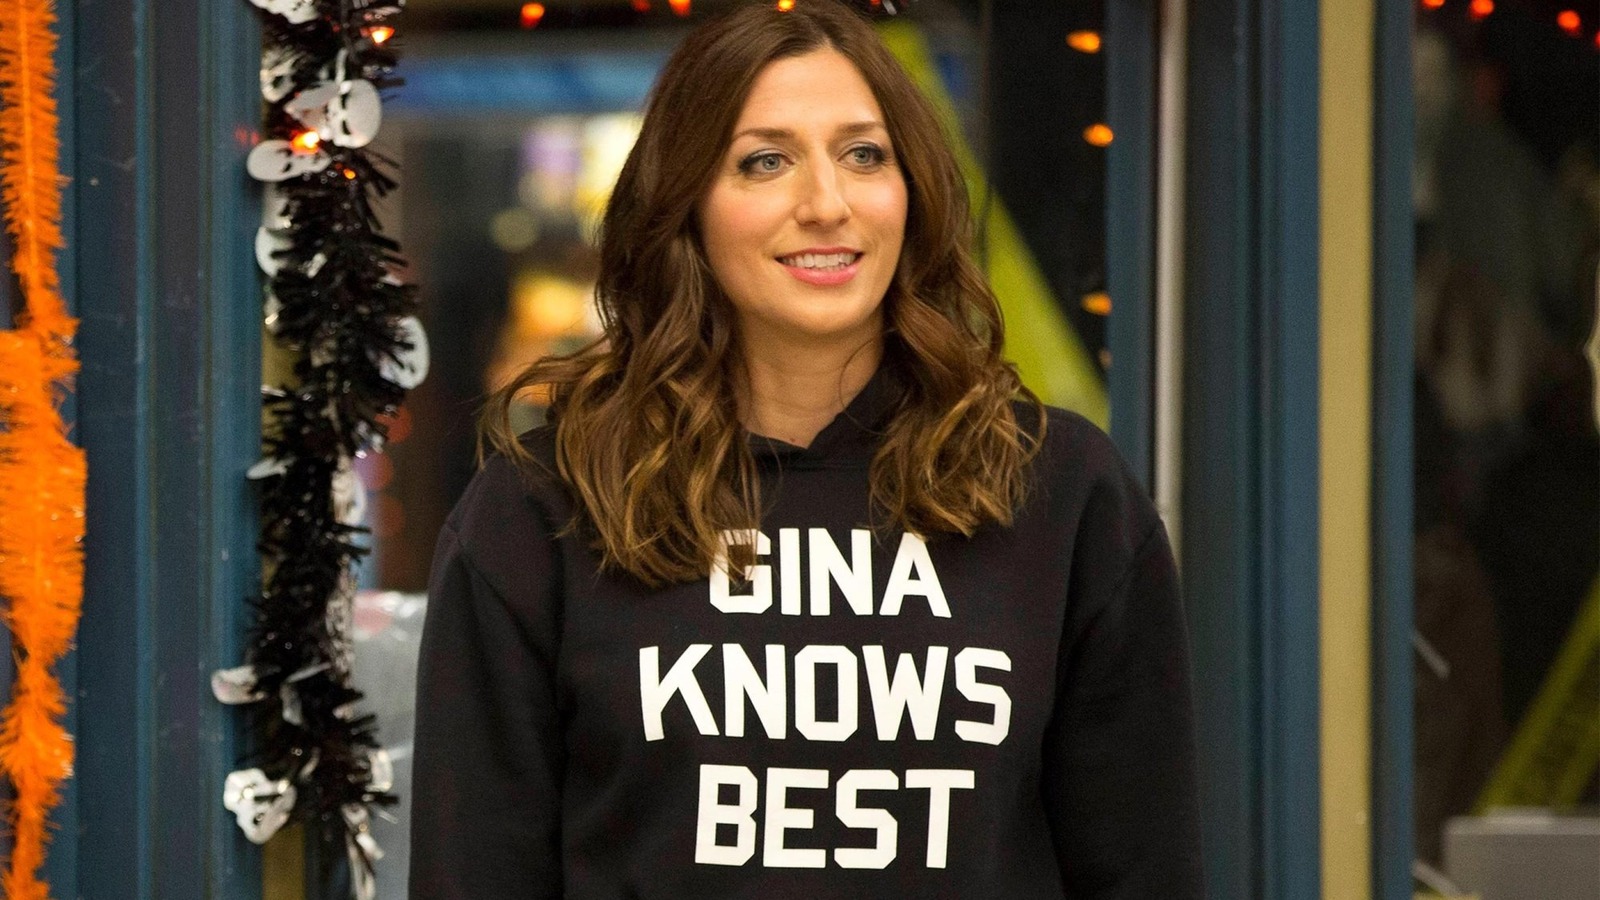 #Chelsea Peretti’s Exit From Brooklyn Nine-Nine Is Still A Mystery